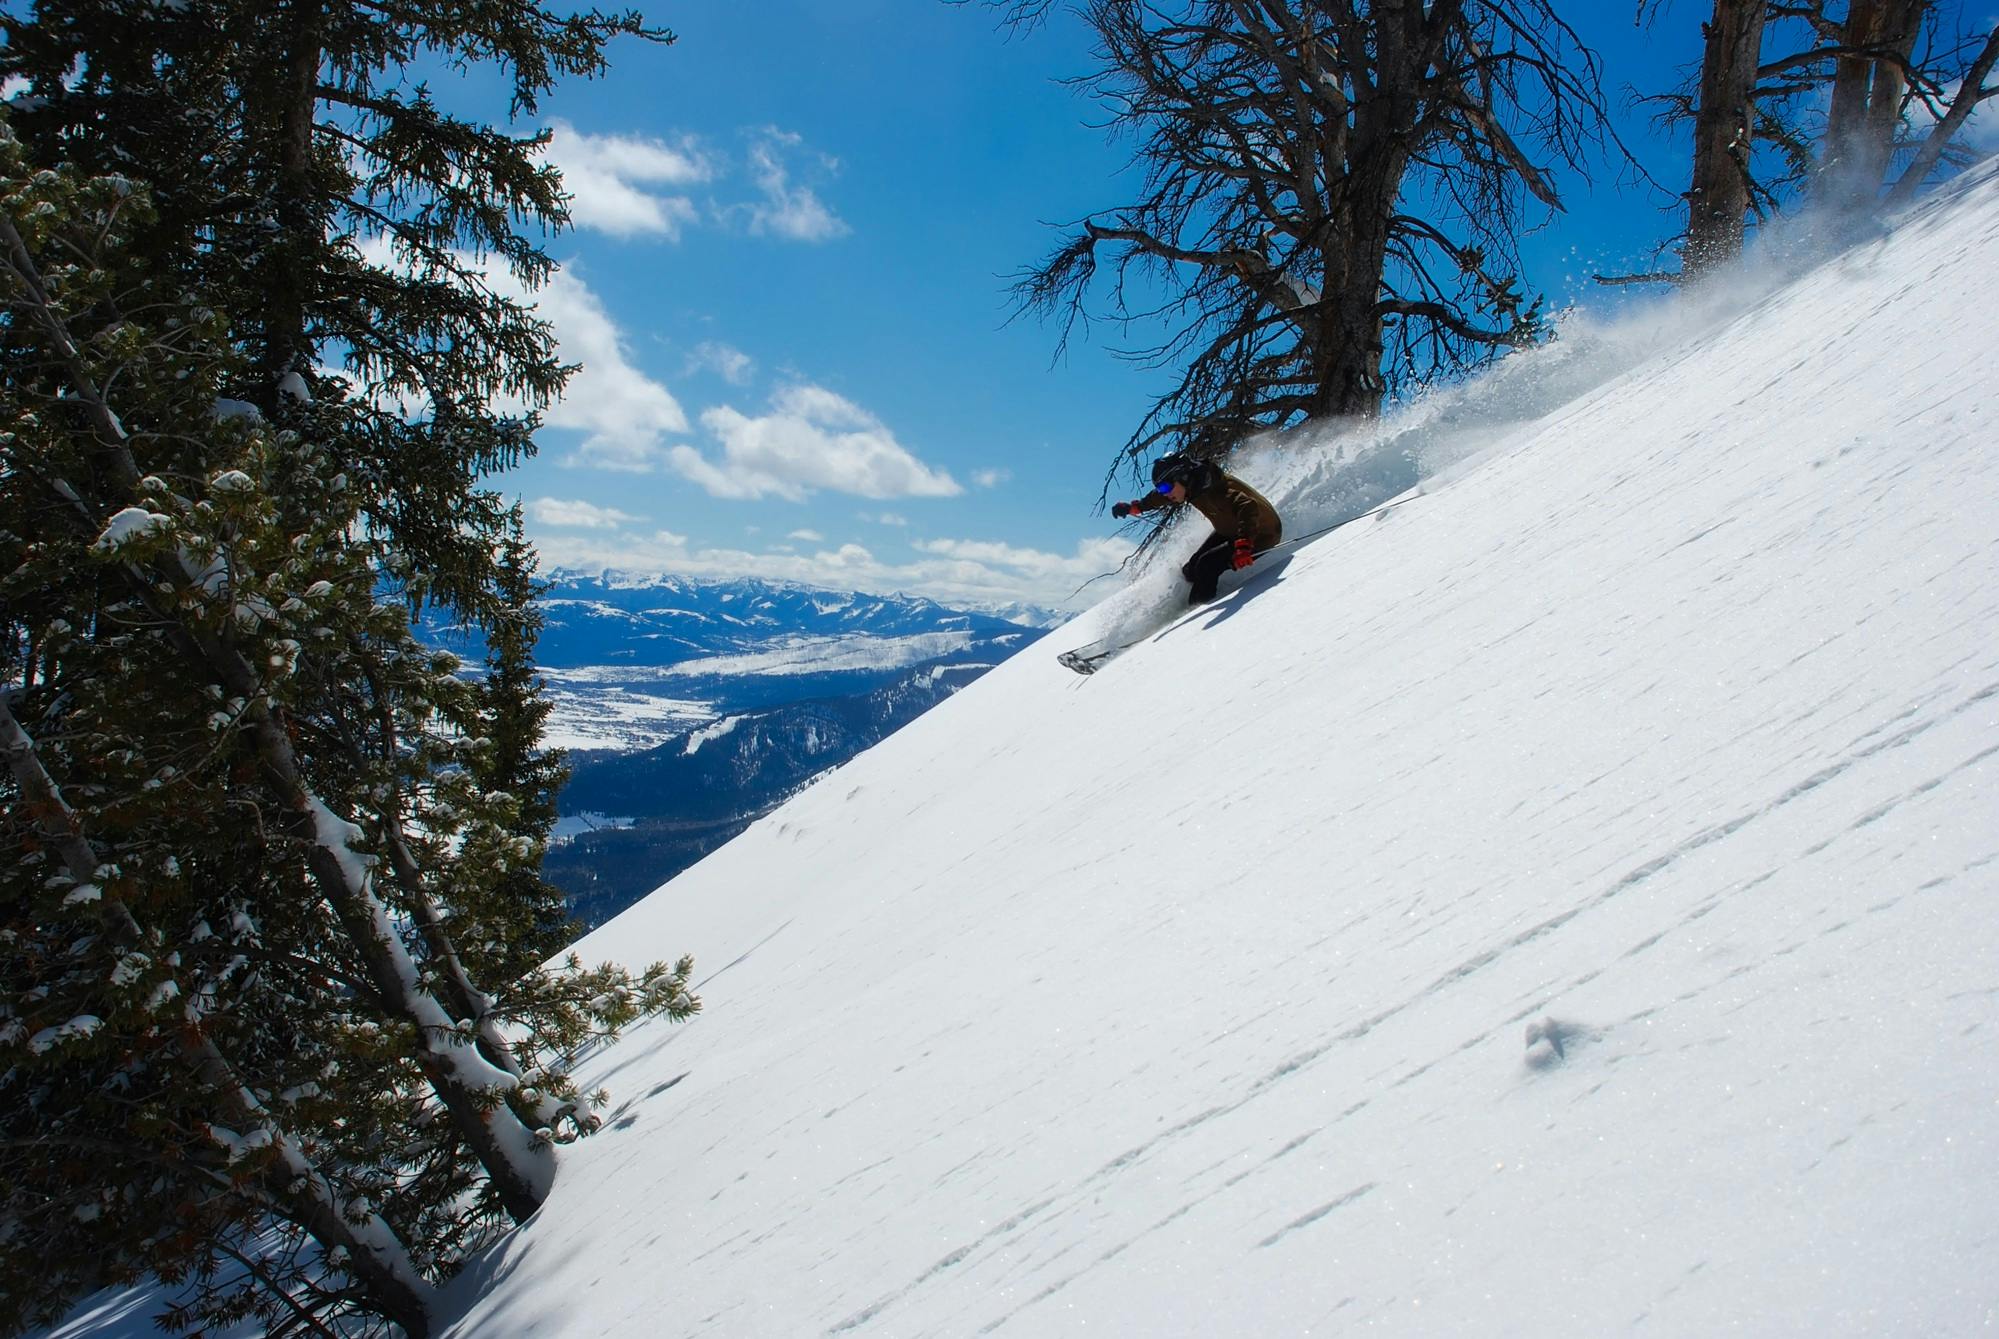 A skier turns while navigating down a steep slope in powdery snow